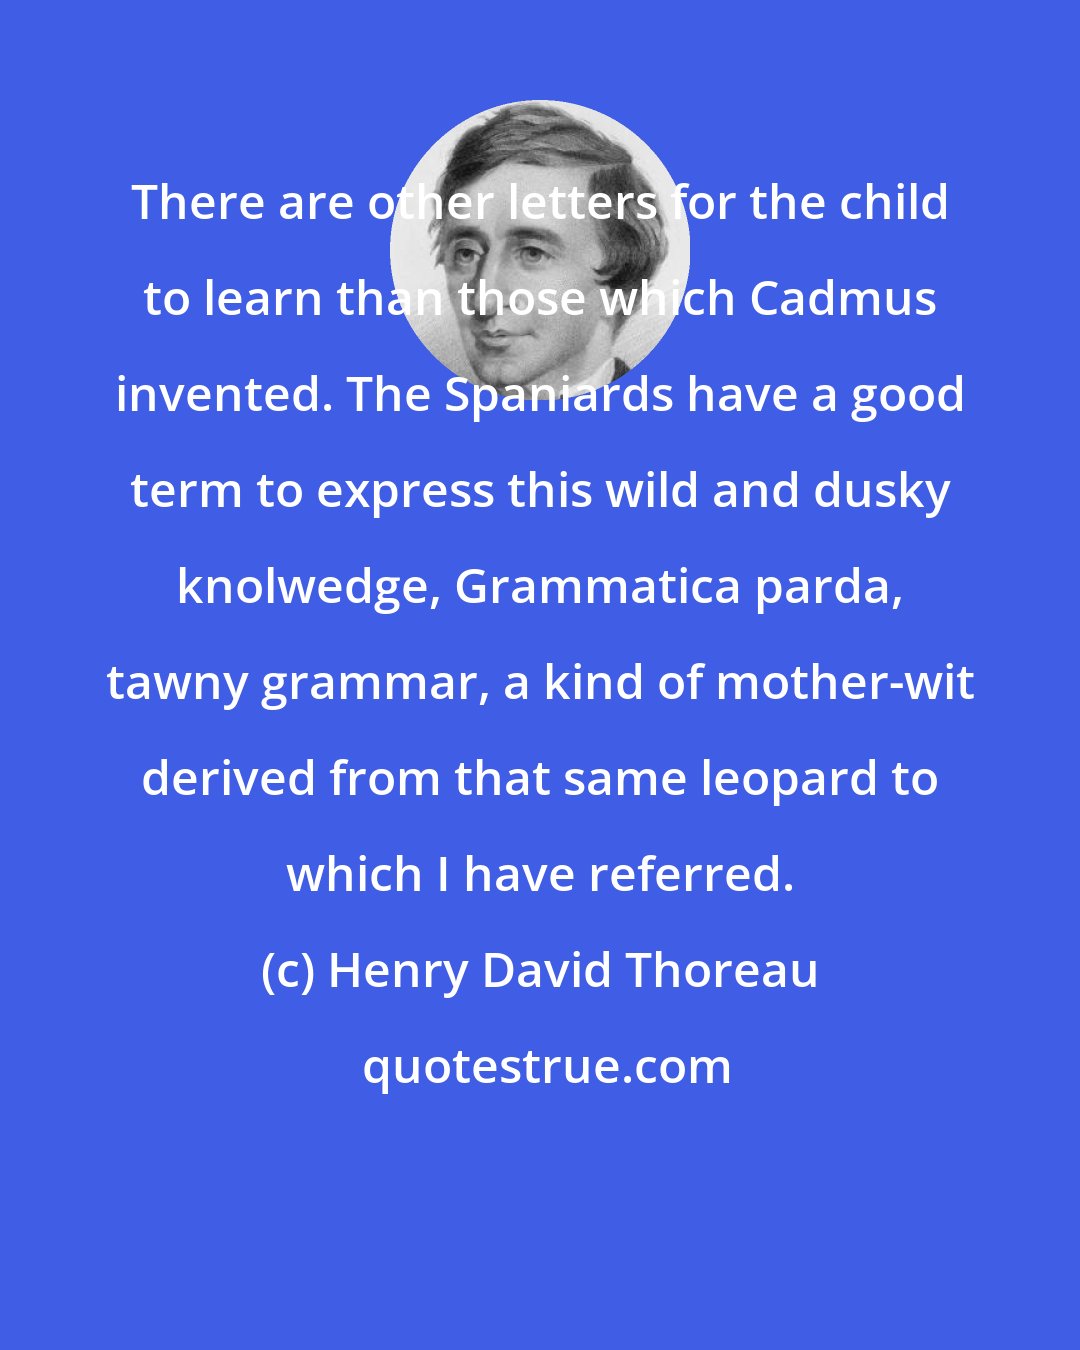 Henry David Thoreau: There are other letters for the child to learn than those which Cadmus invented. The Spaniards have a good term to express this wild and dusky knolwedge, Grammatica parda, tawny grammar, a kind of mother-wit derived from that same leopard to which I have referred.